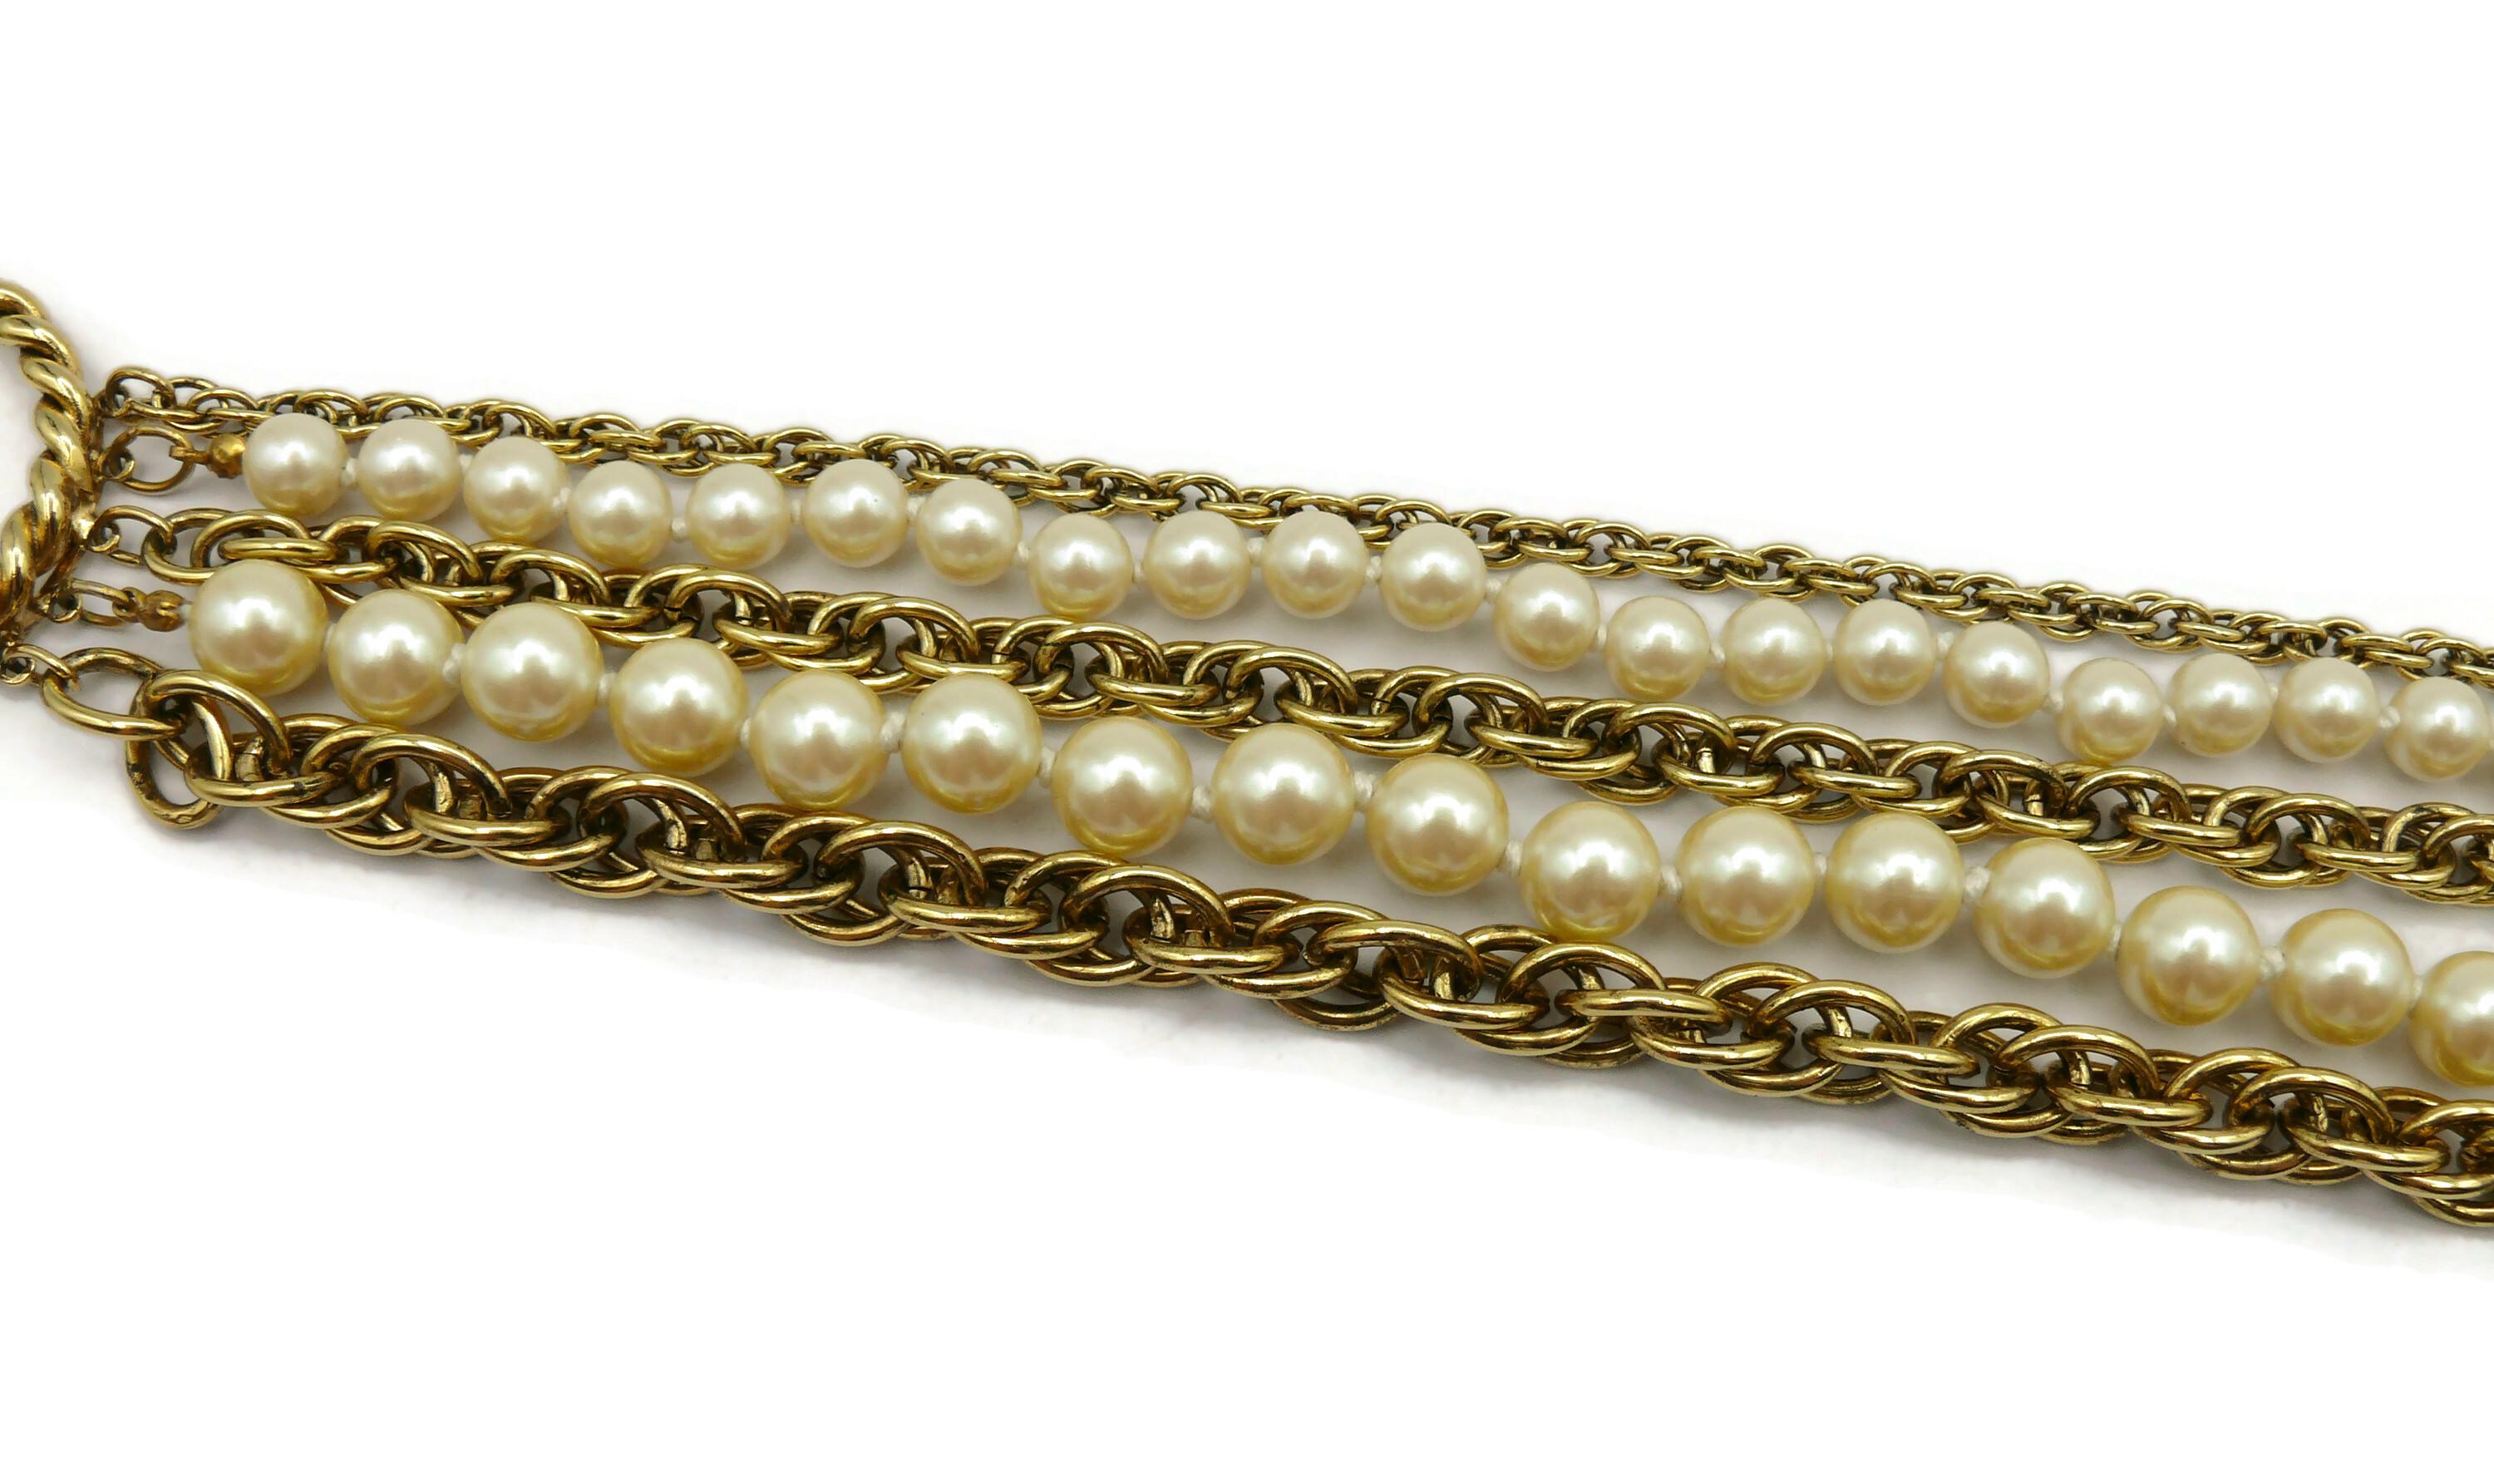 MOSCHINO Vintage Multi-Strand Gold Tone Chain & Pearl Necklace In Good Condition For Sale In Nice, FR